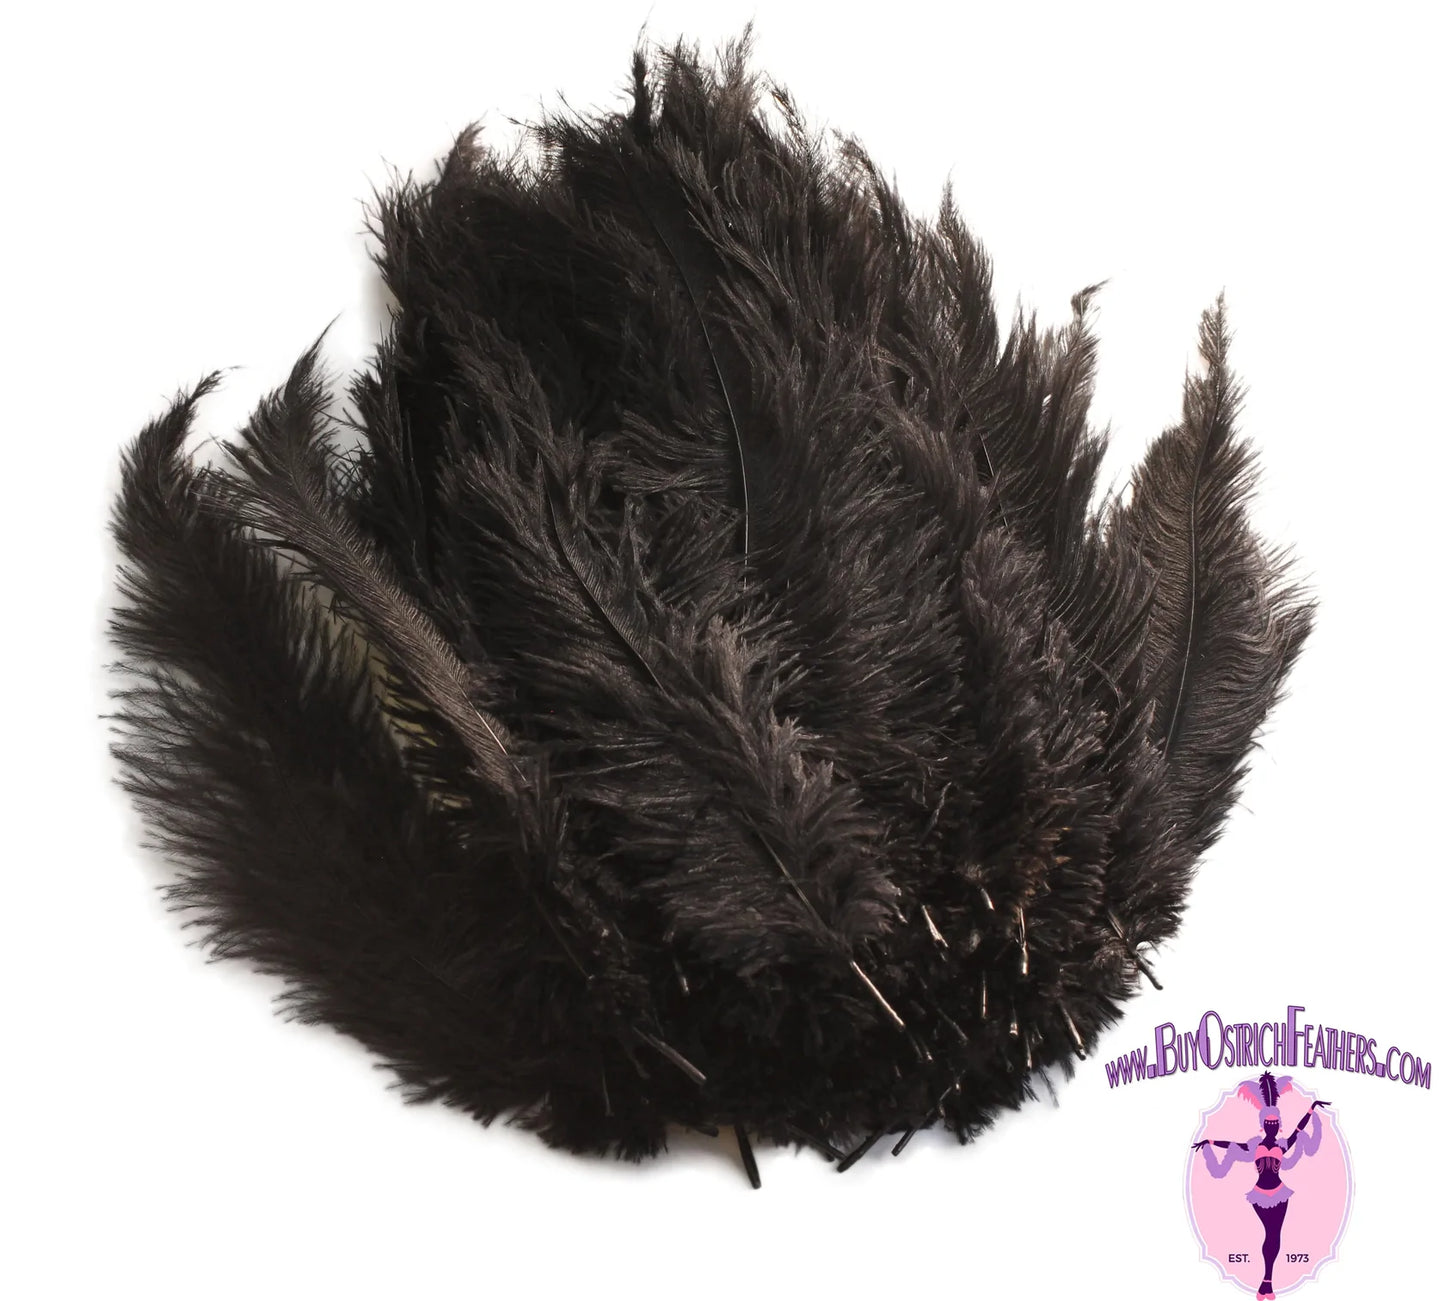 Ostrich Feather Rental 16-20" (Black) - 250pcs - Buy Ostrich Feathers